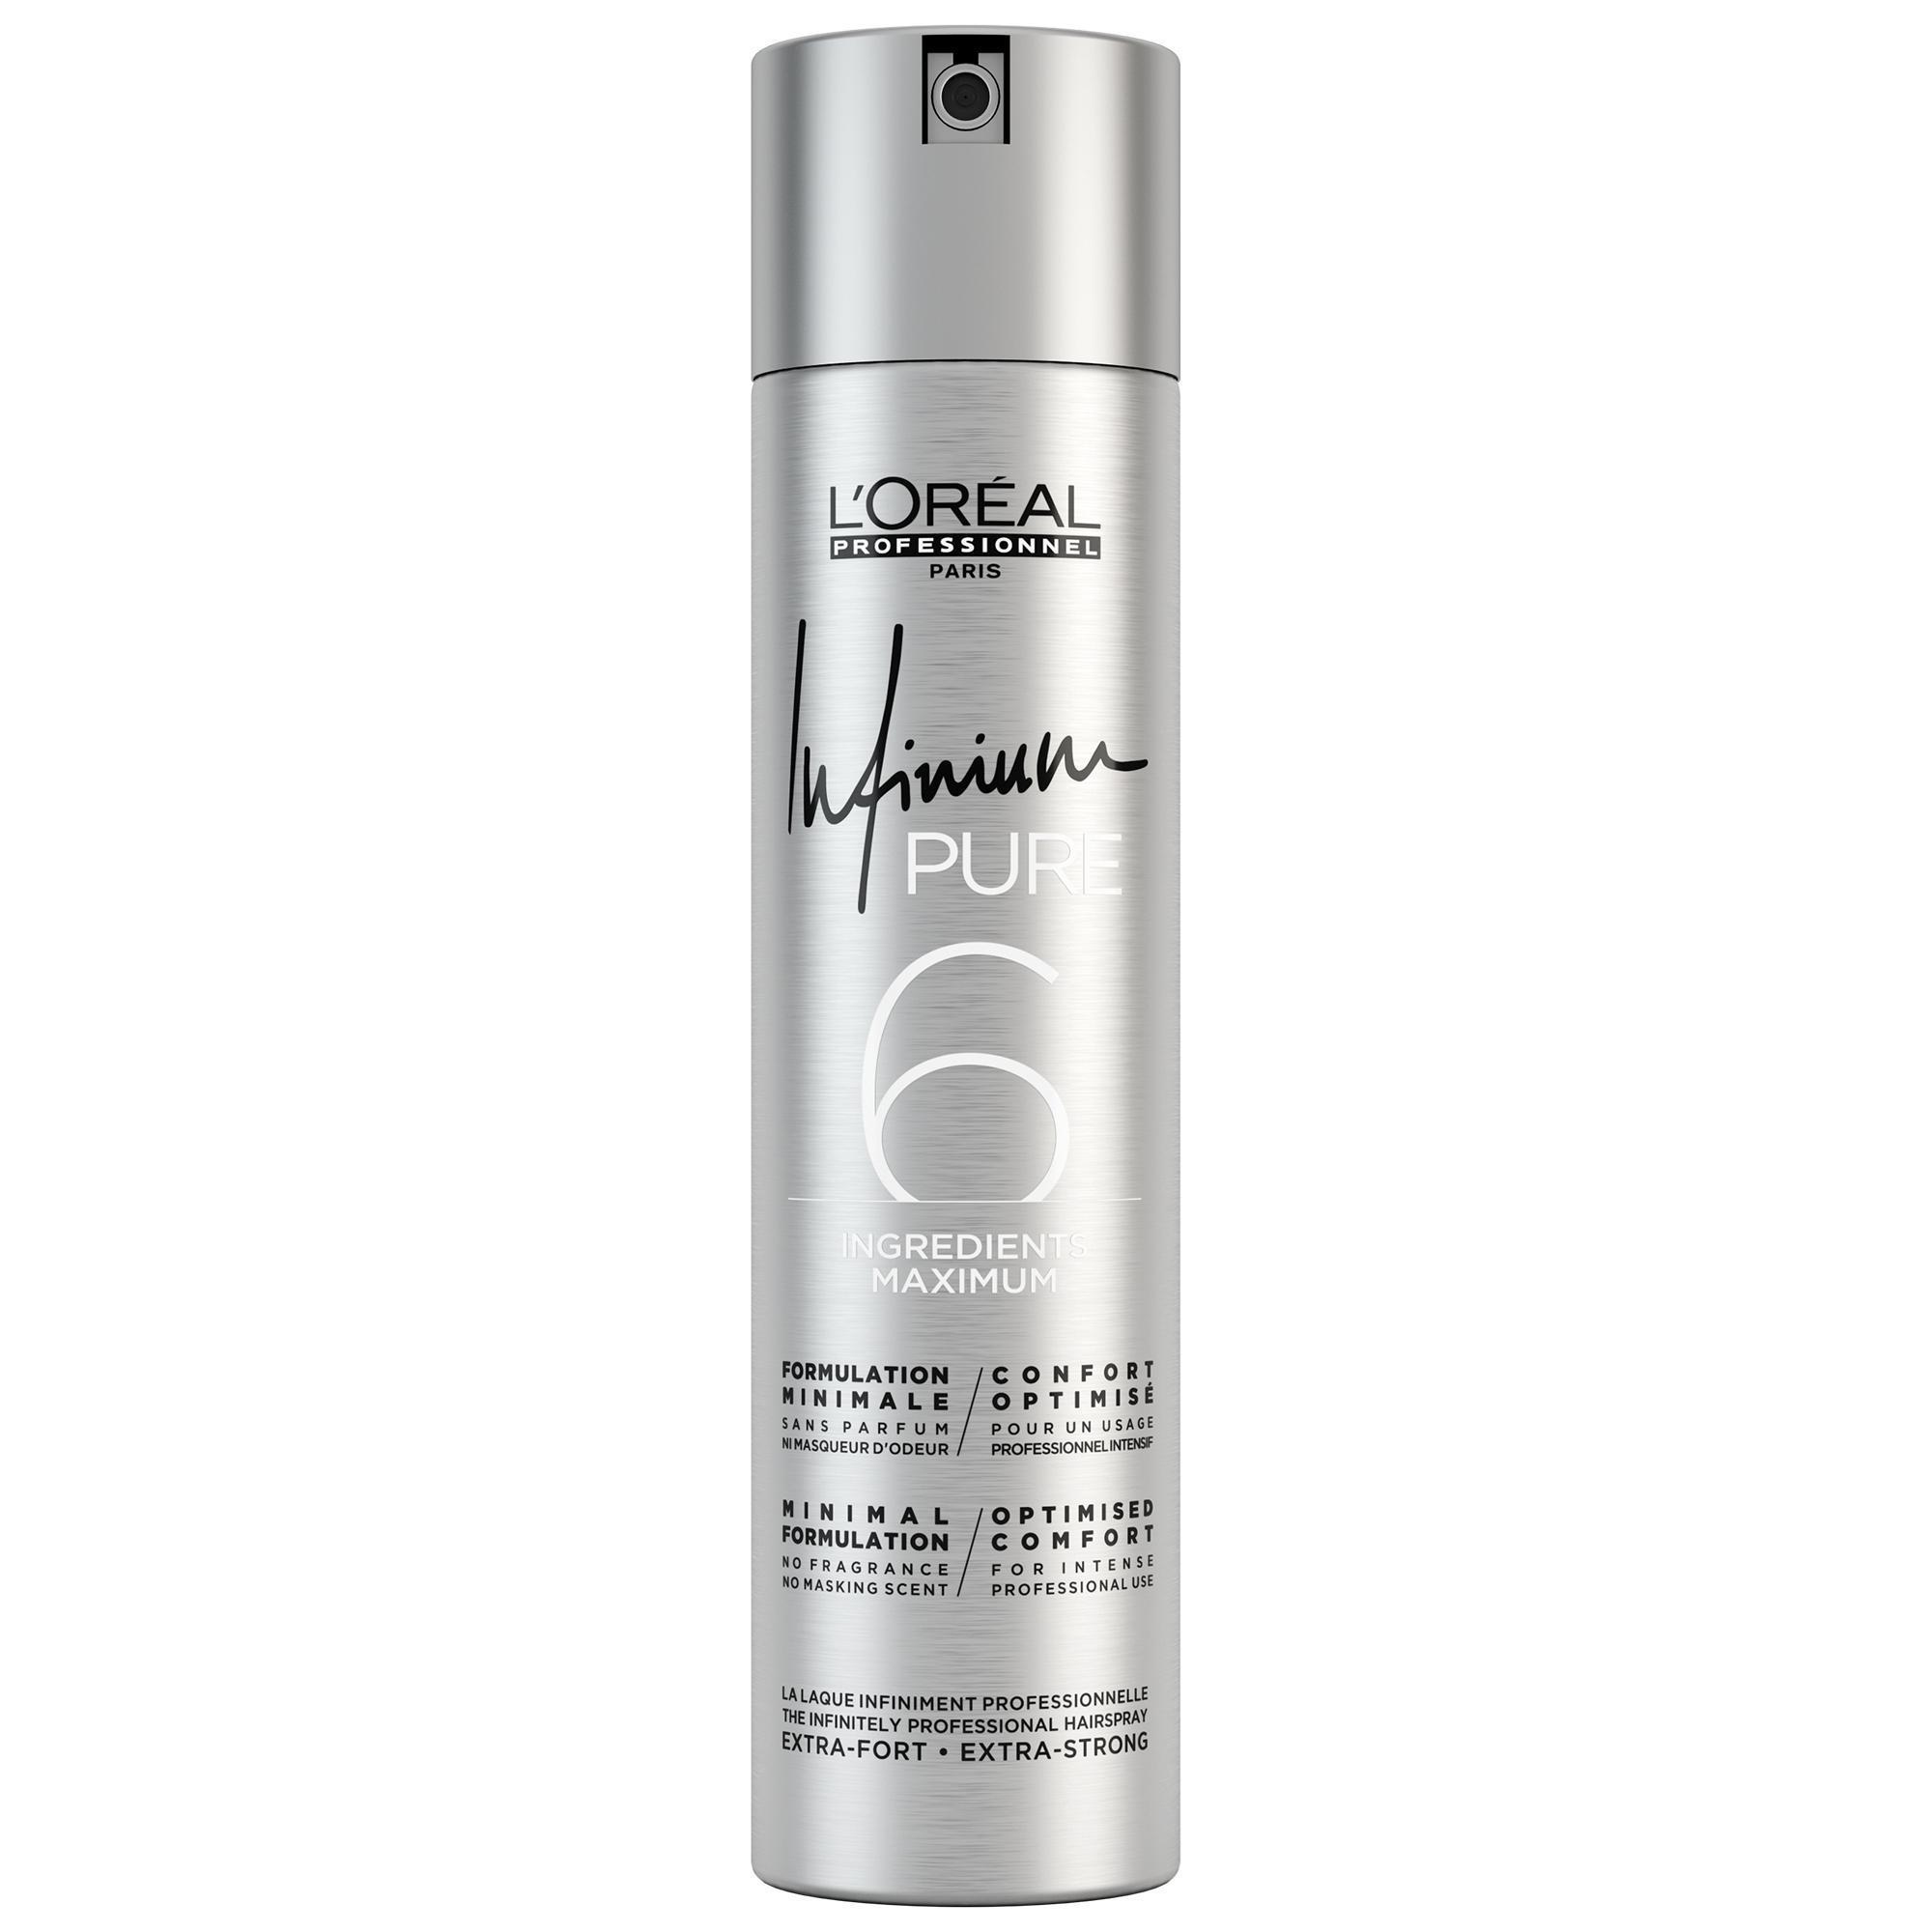 L'Oreal Professionnel Infinium Pure strong